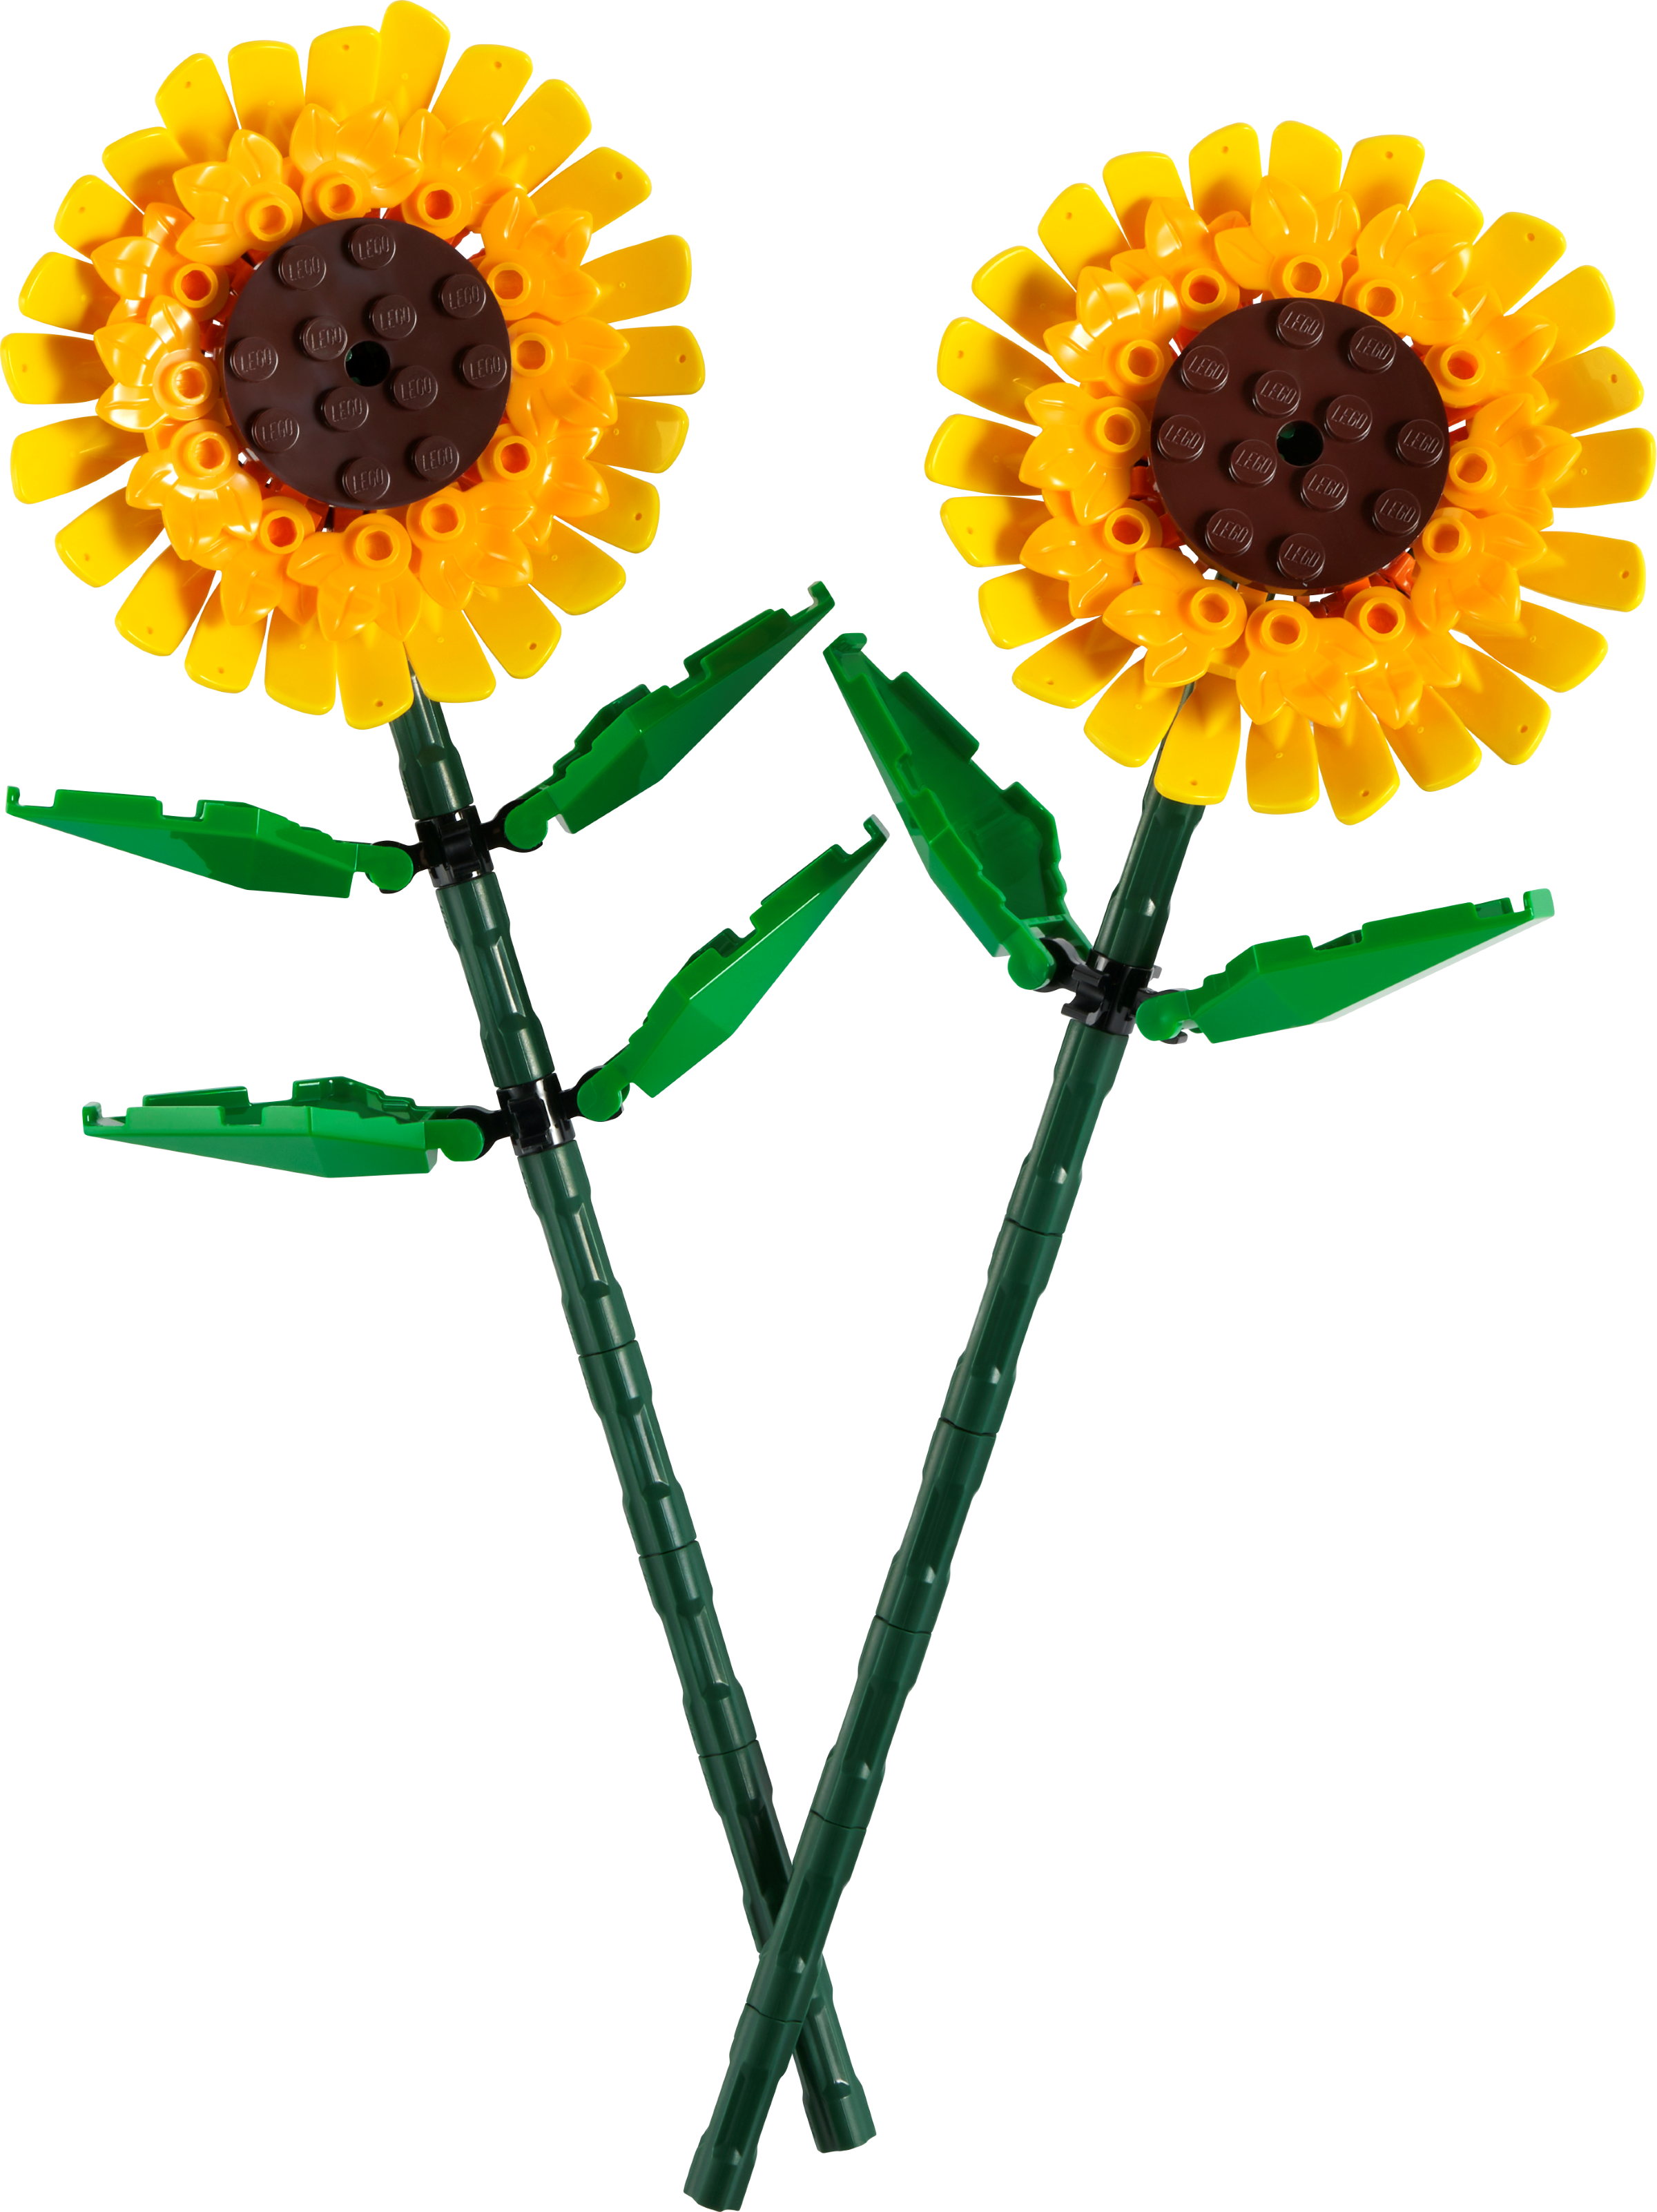 Sunflowers 40524, The Botanical Collection